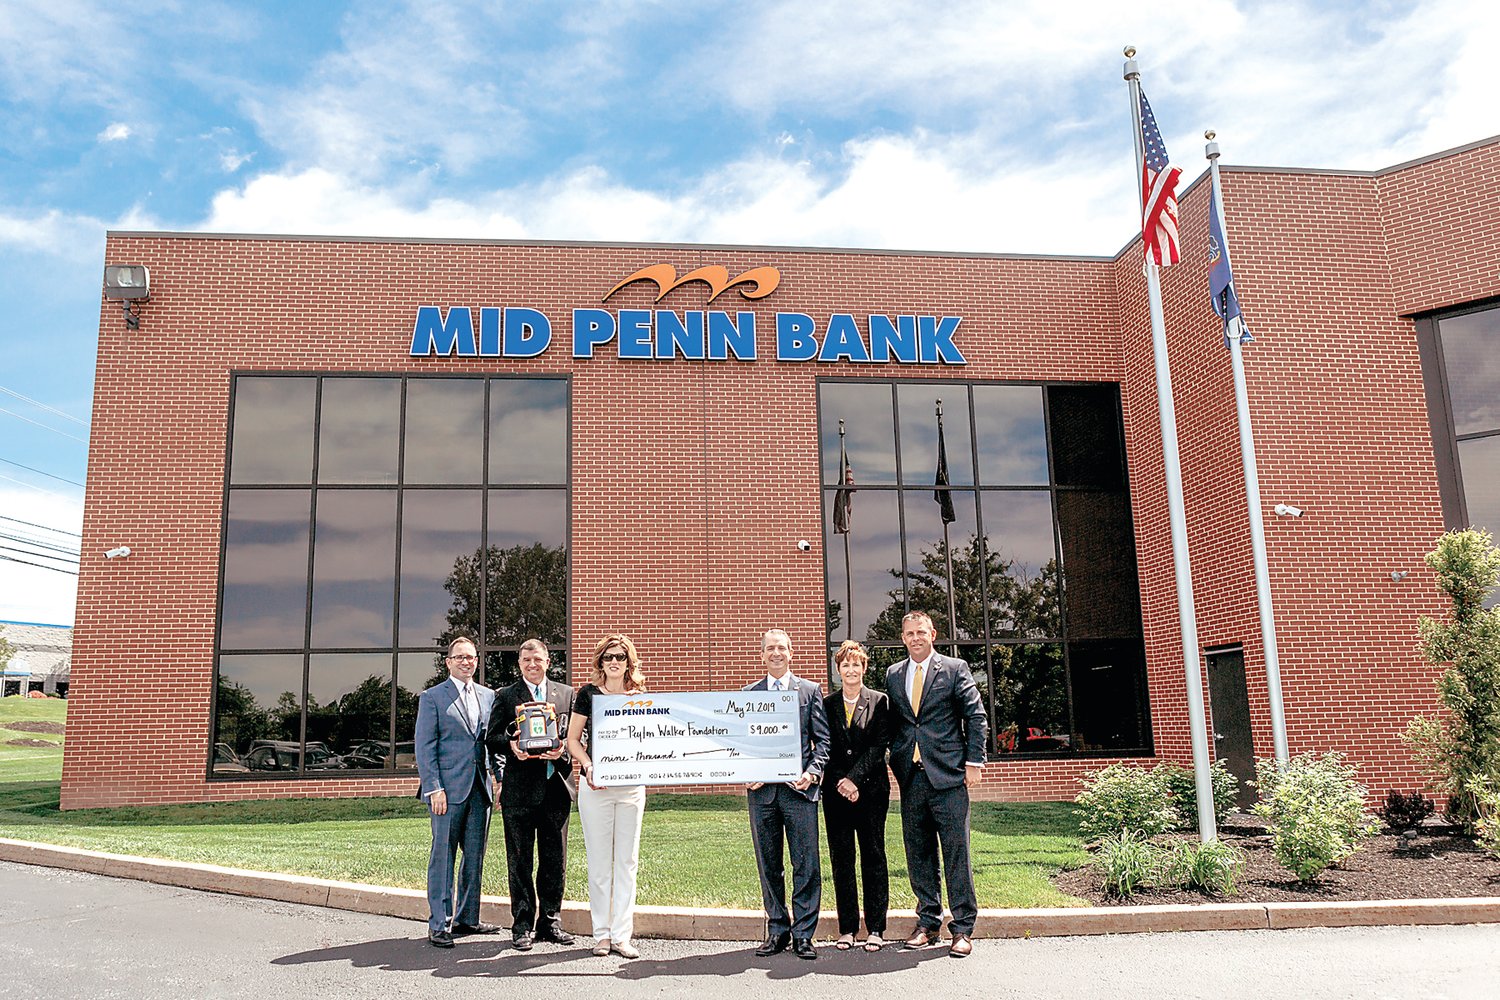 From left are: Justin Webb, chief operating officer, Mid Penn Bank; Michael Peduzzi, chief financial officer, Mid Penn Bank; Julie Walker, founder and executive director, The Peyton Walker Foundation; Rory Ritrievi, president and CEO, Mid Penn Bank; Joan Dickinson, chief of staff, Mid Penn Bank; and Scott Micklewright, chief revenue officer, Mid Penn Bank.